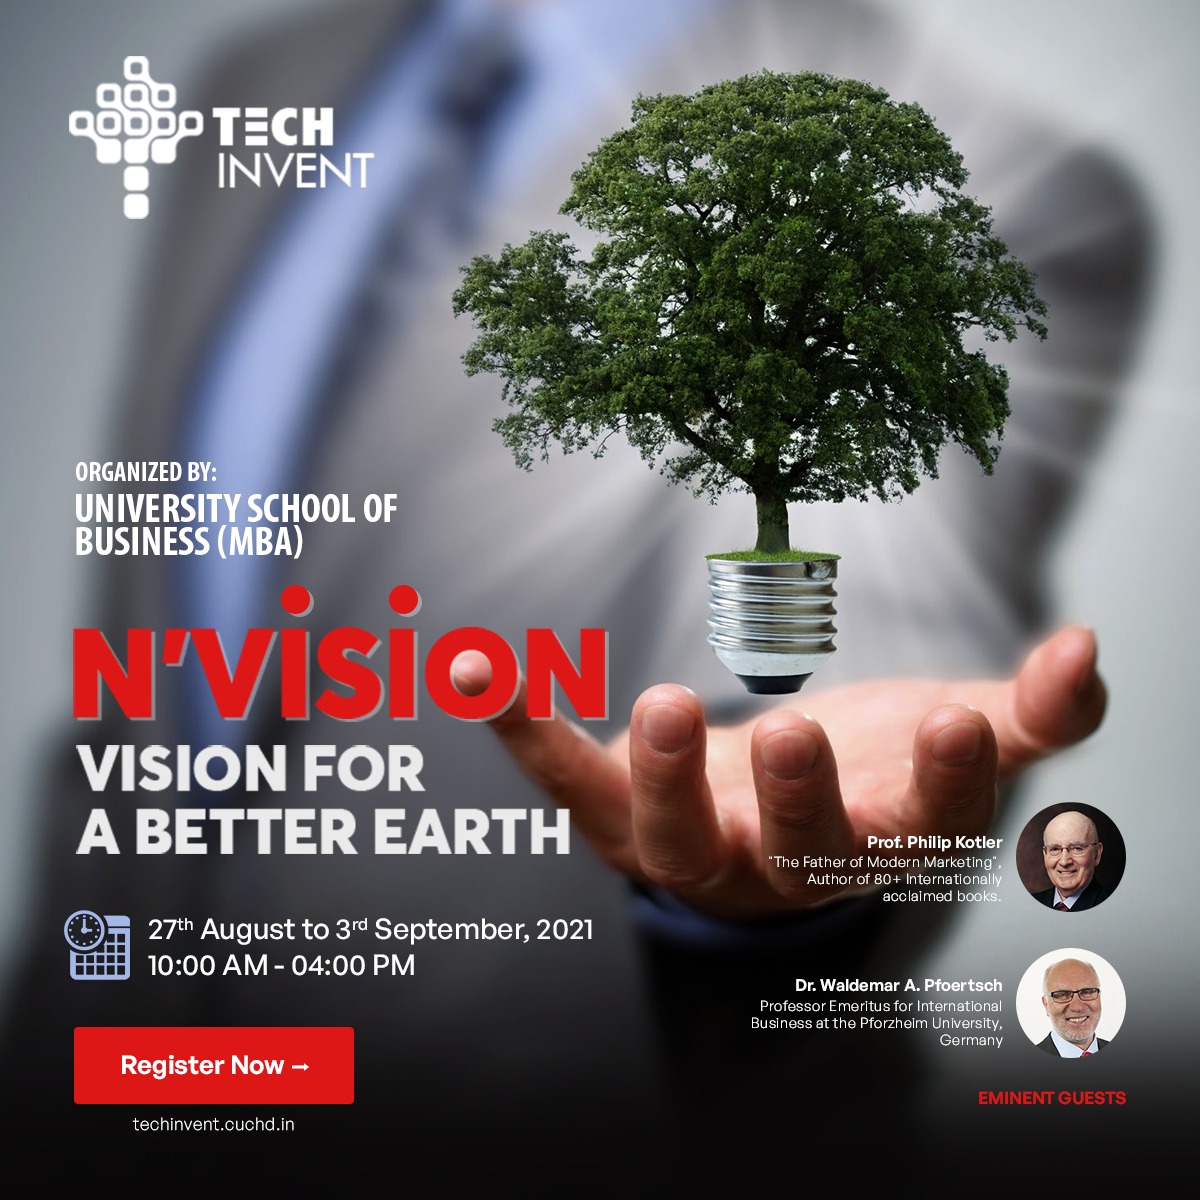 AD MAKING COMPETITION: N'VISION @CHANDIGARH UNIVERSITY TECH FEST, Chandigarh, India